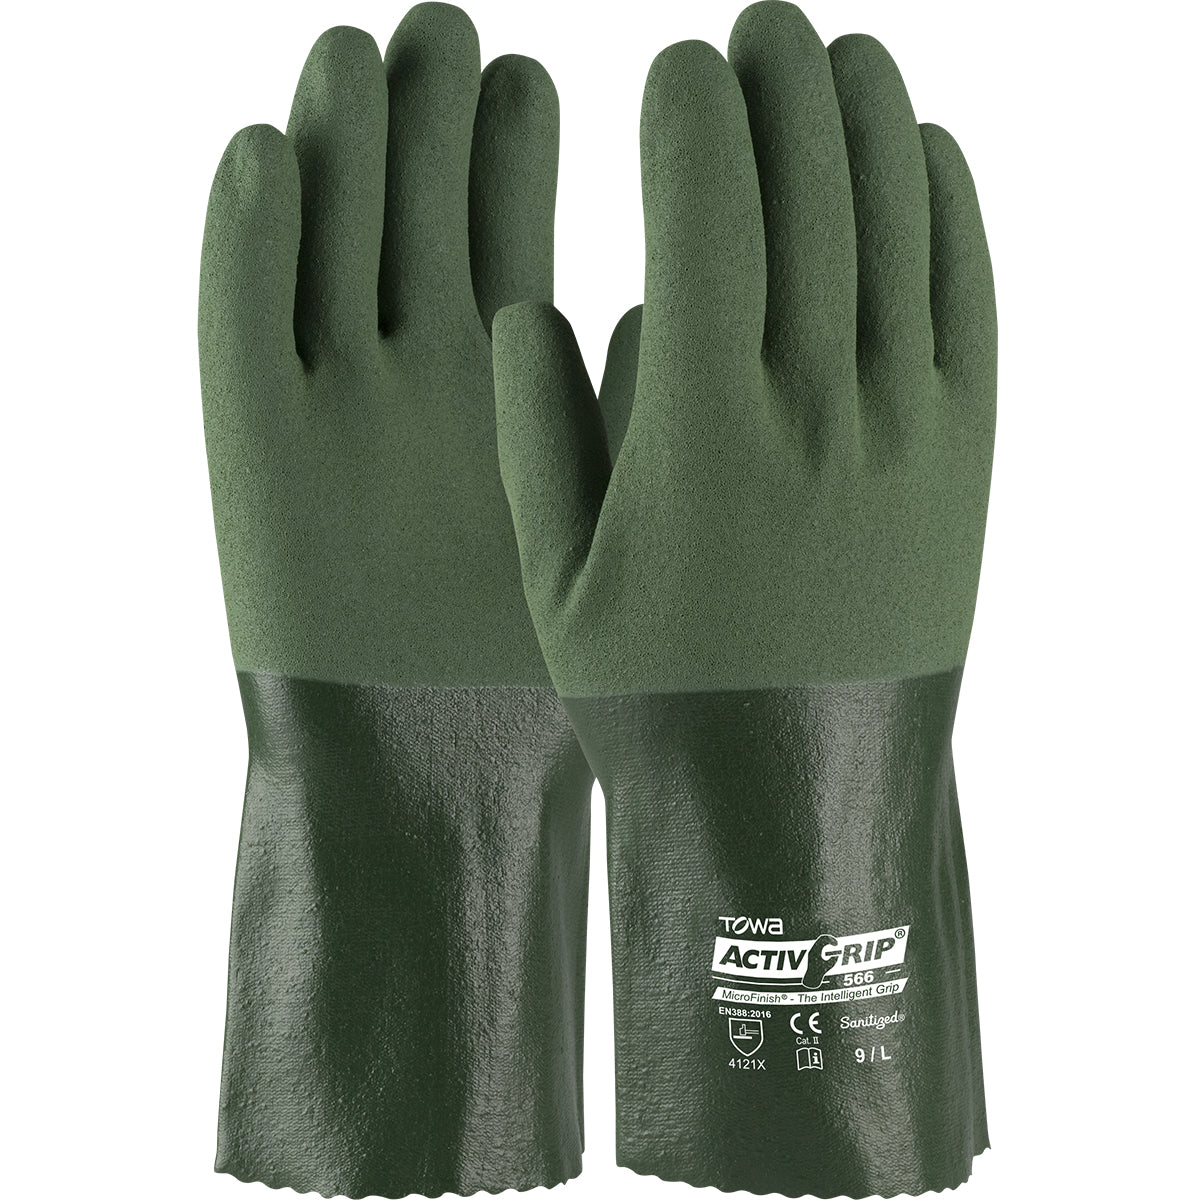 PIP - Nitrile Coated Glove with Cotton Liner and MicroFinish Grip - 12"-eSafety Supplies, Inc